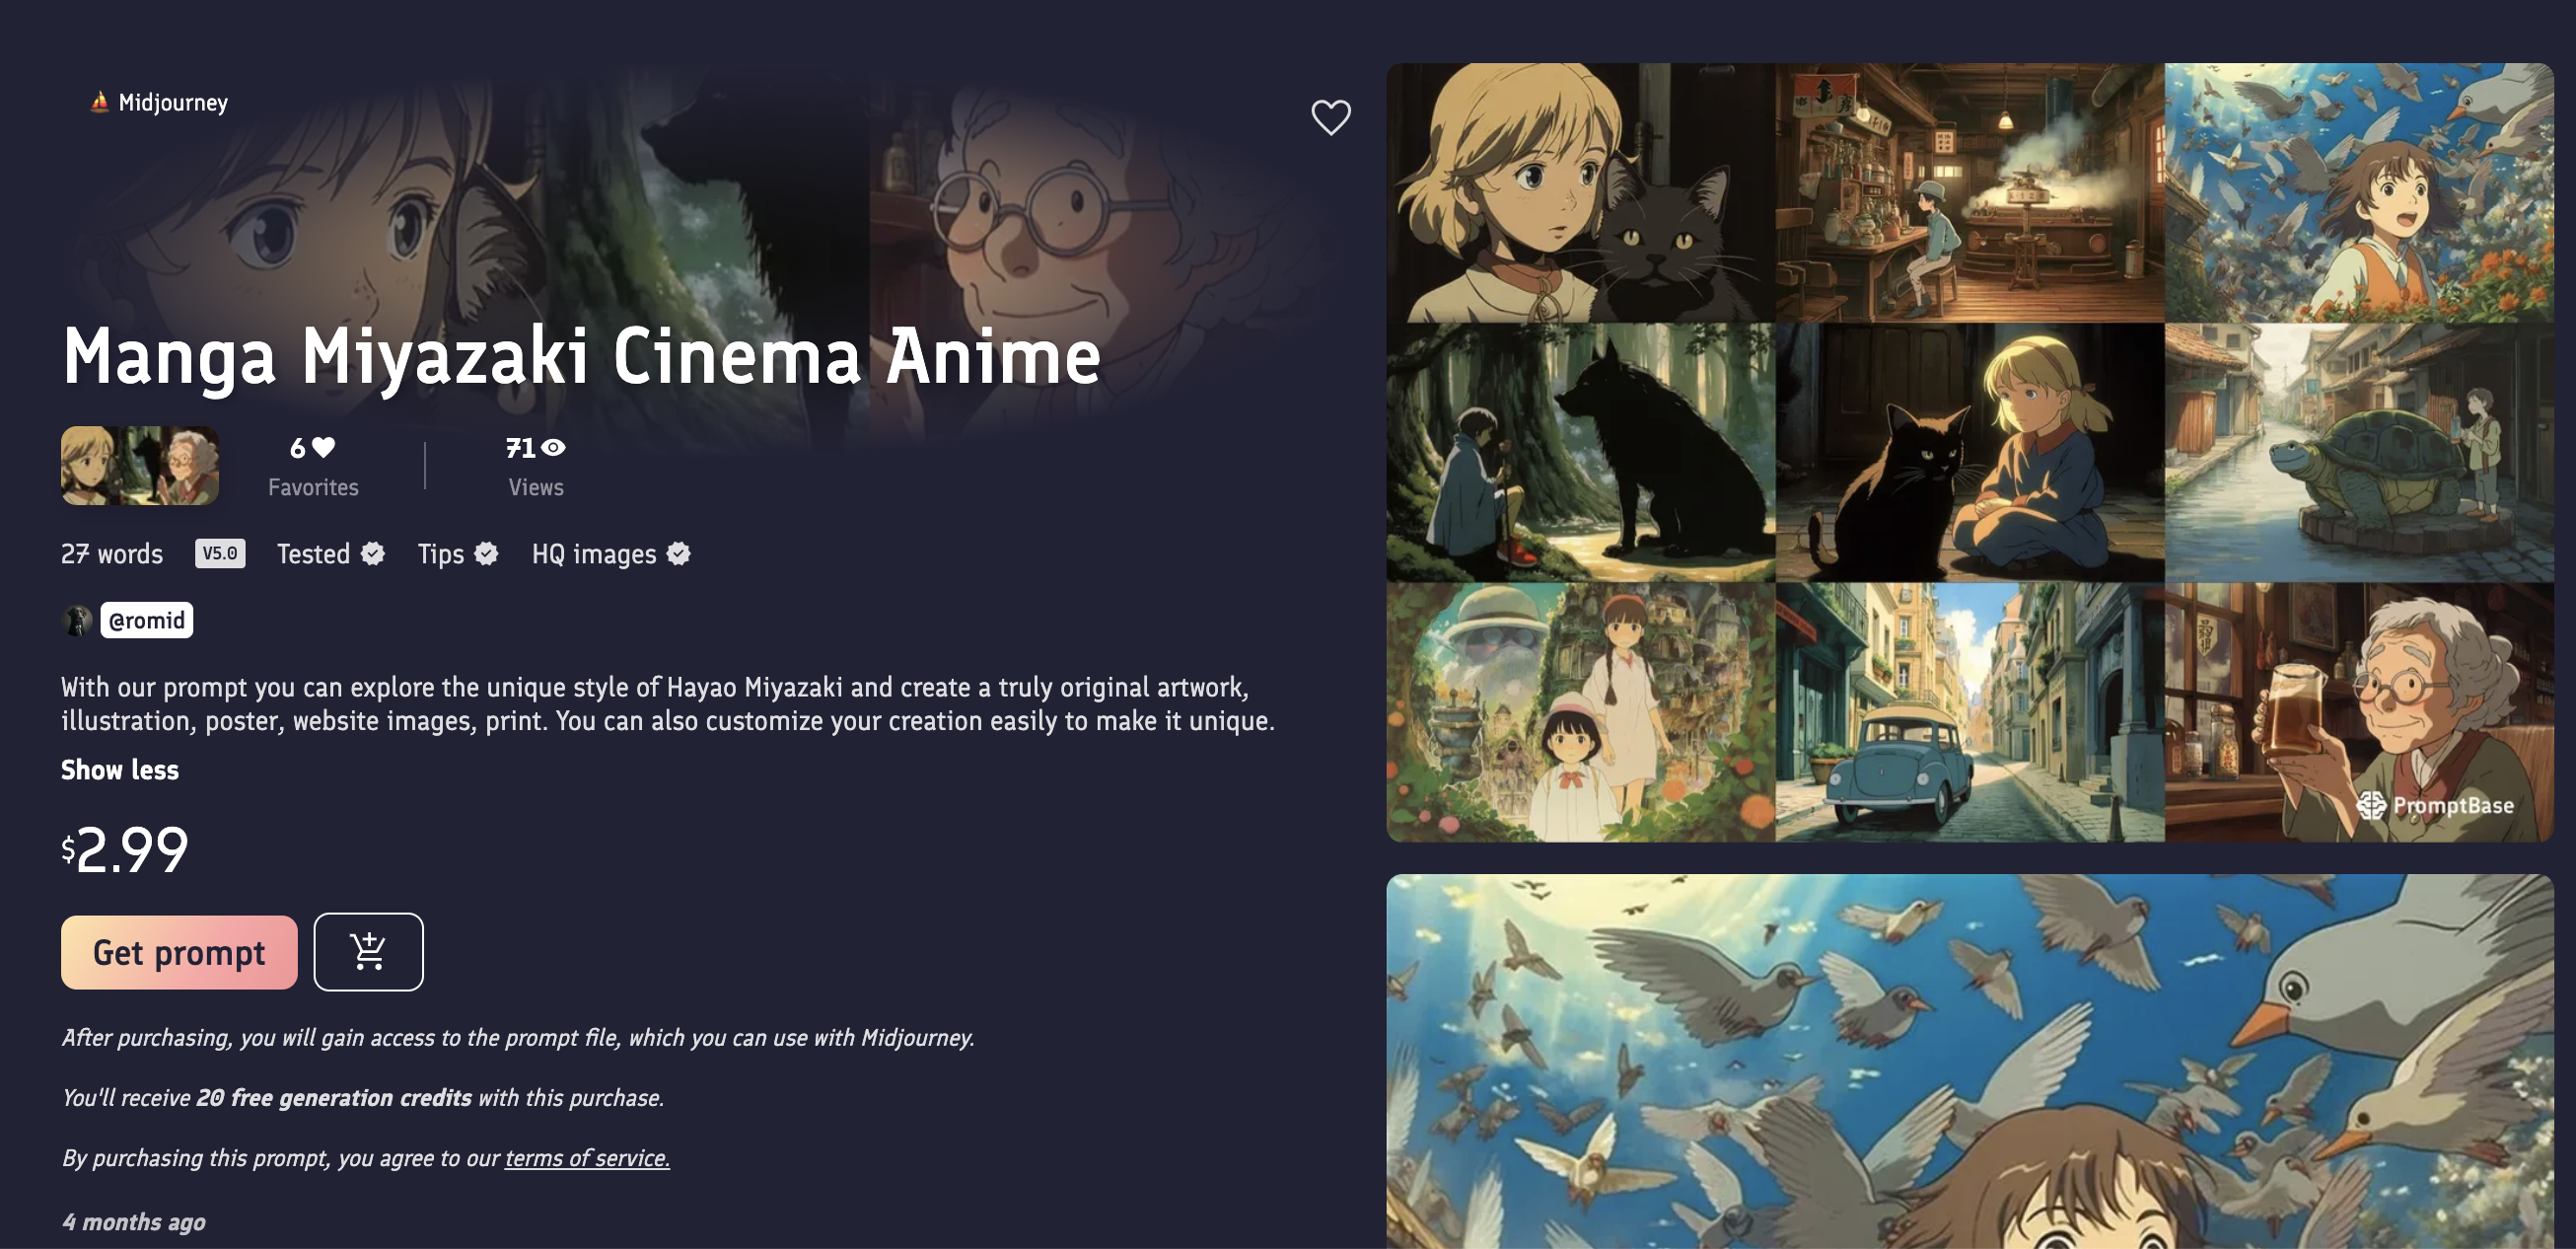 Screenshot of a listing on Promptbase advertising 'With our prompt you can explore the unique style of Hayao Miyazaki and create a truly original artwork, illustration, poster, website images, print', with some example images in his whimsical style. 